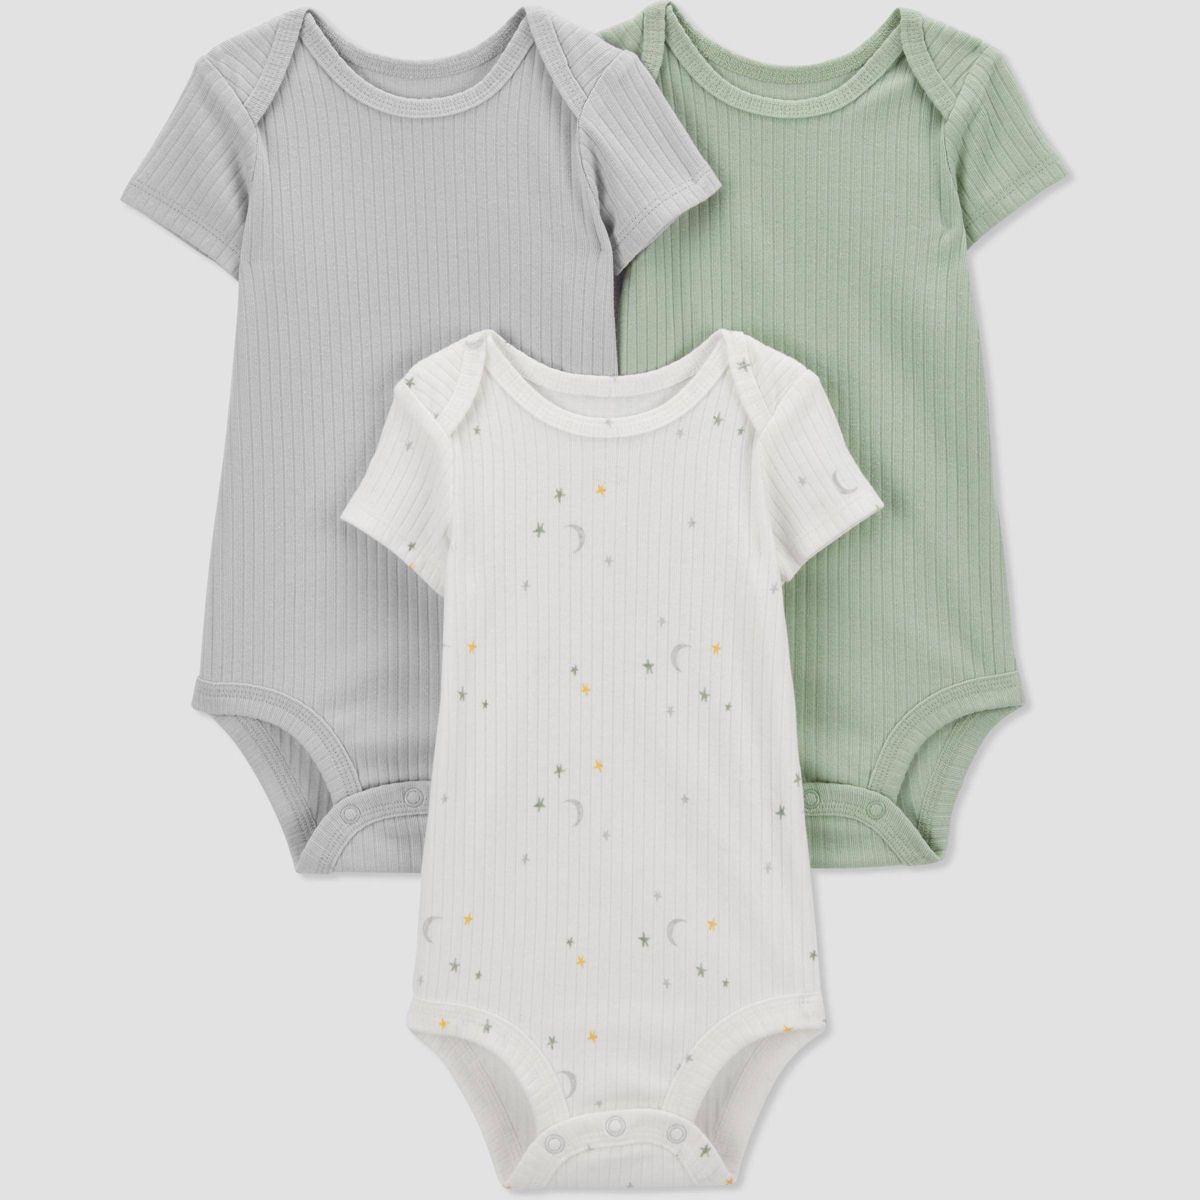 Carter's Just One You® Baby 3pk Bodysuit - Green/White | Target